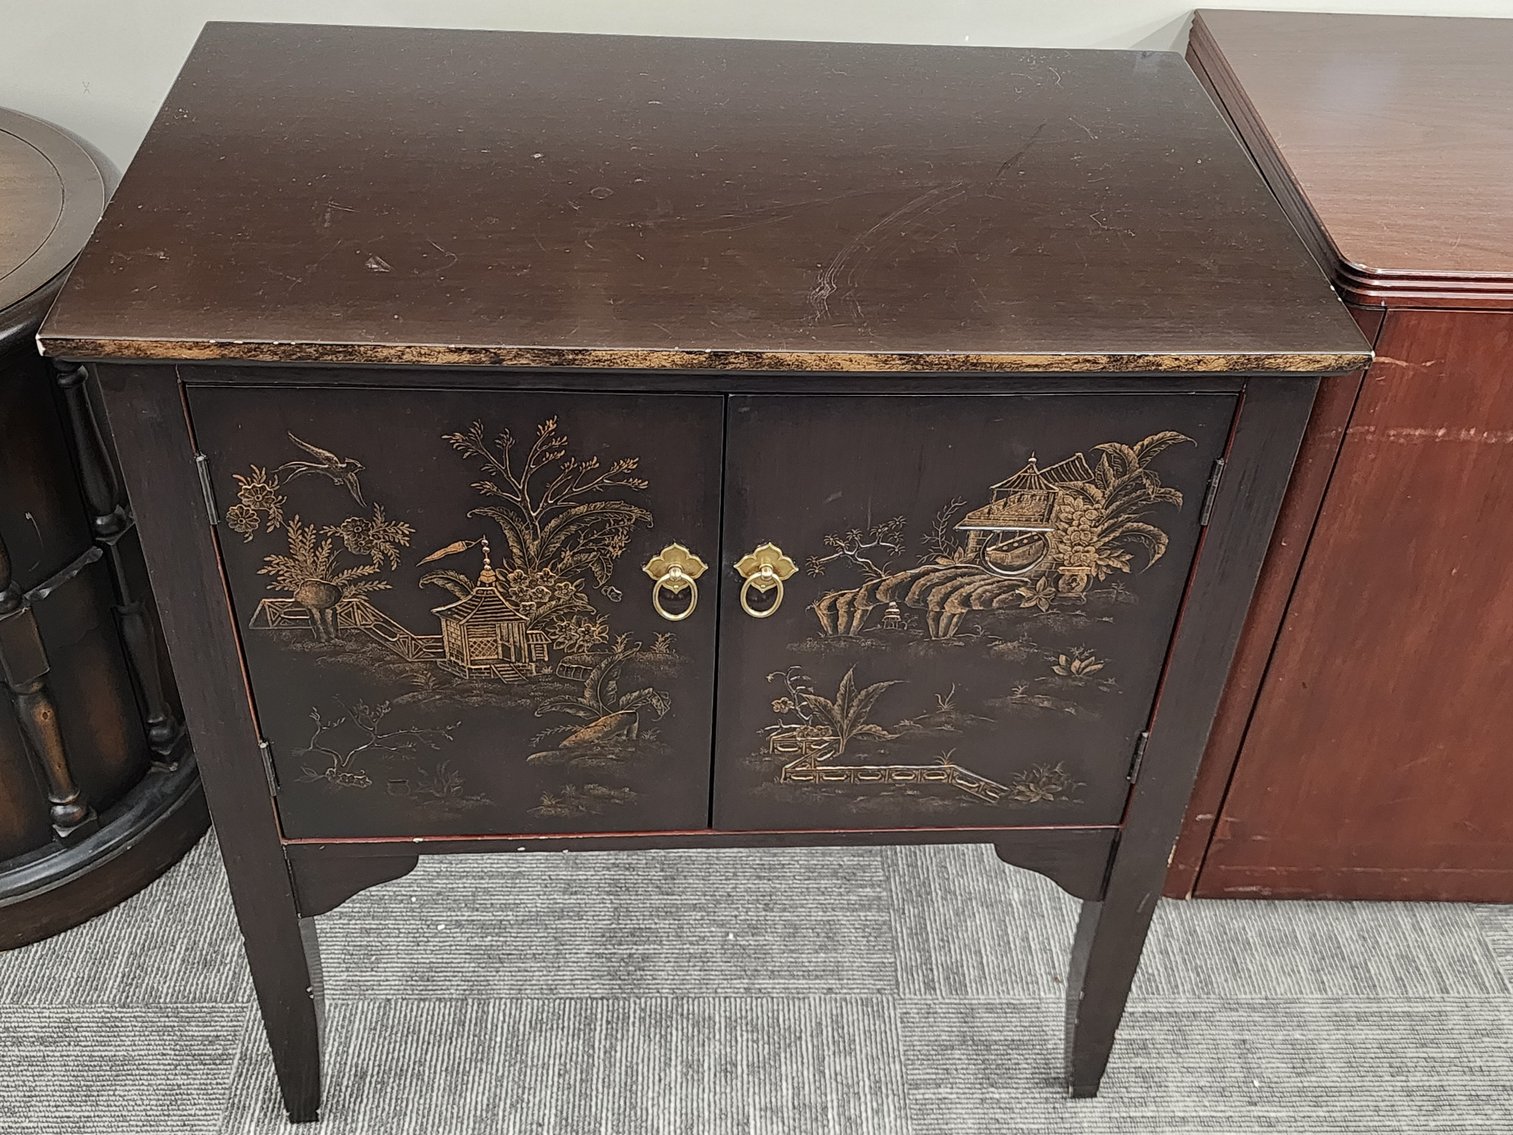 Stamps, Coins & Office Furnishings Auction